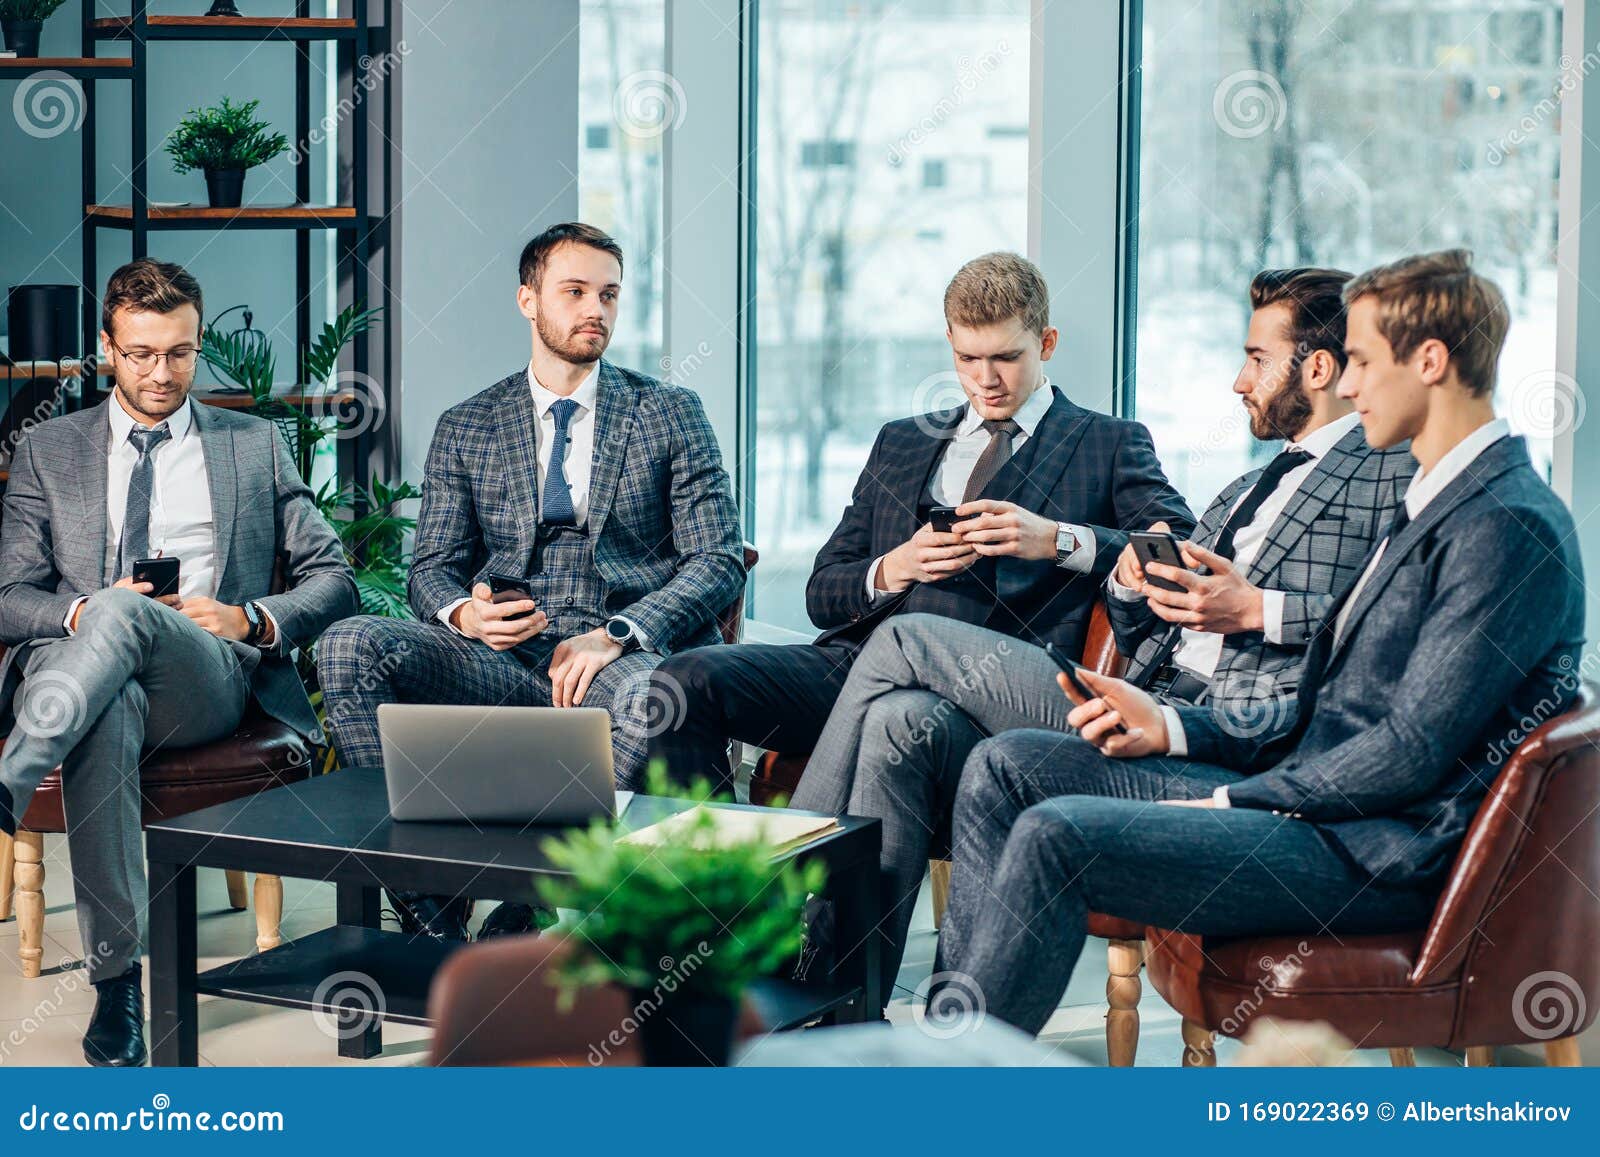 group-young-business-men-gathered-together-to-discuss-strategies-new-ideas-coworking-modern-executive-boardroom-everyone-169022369.jpg